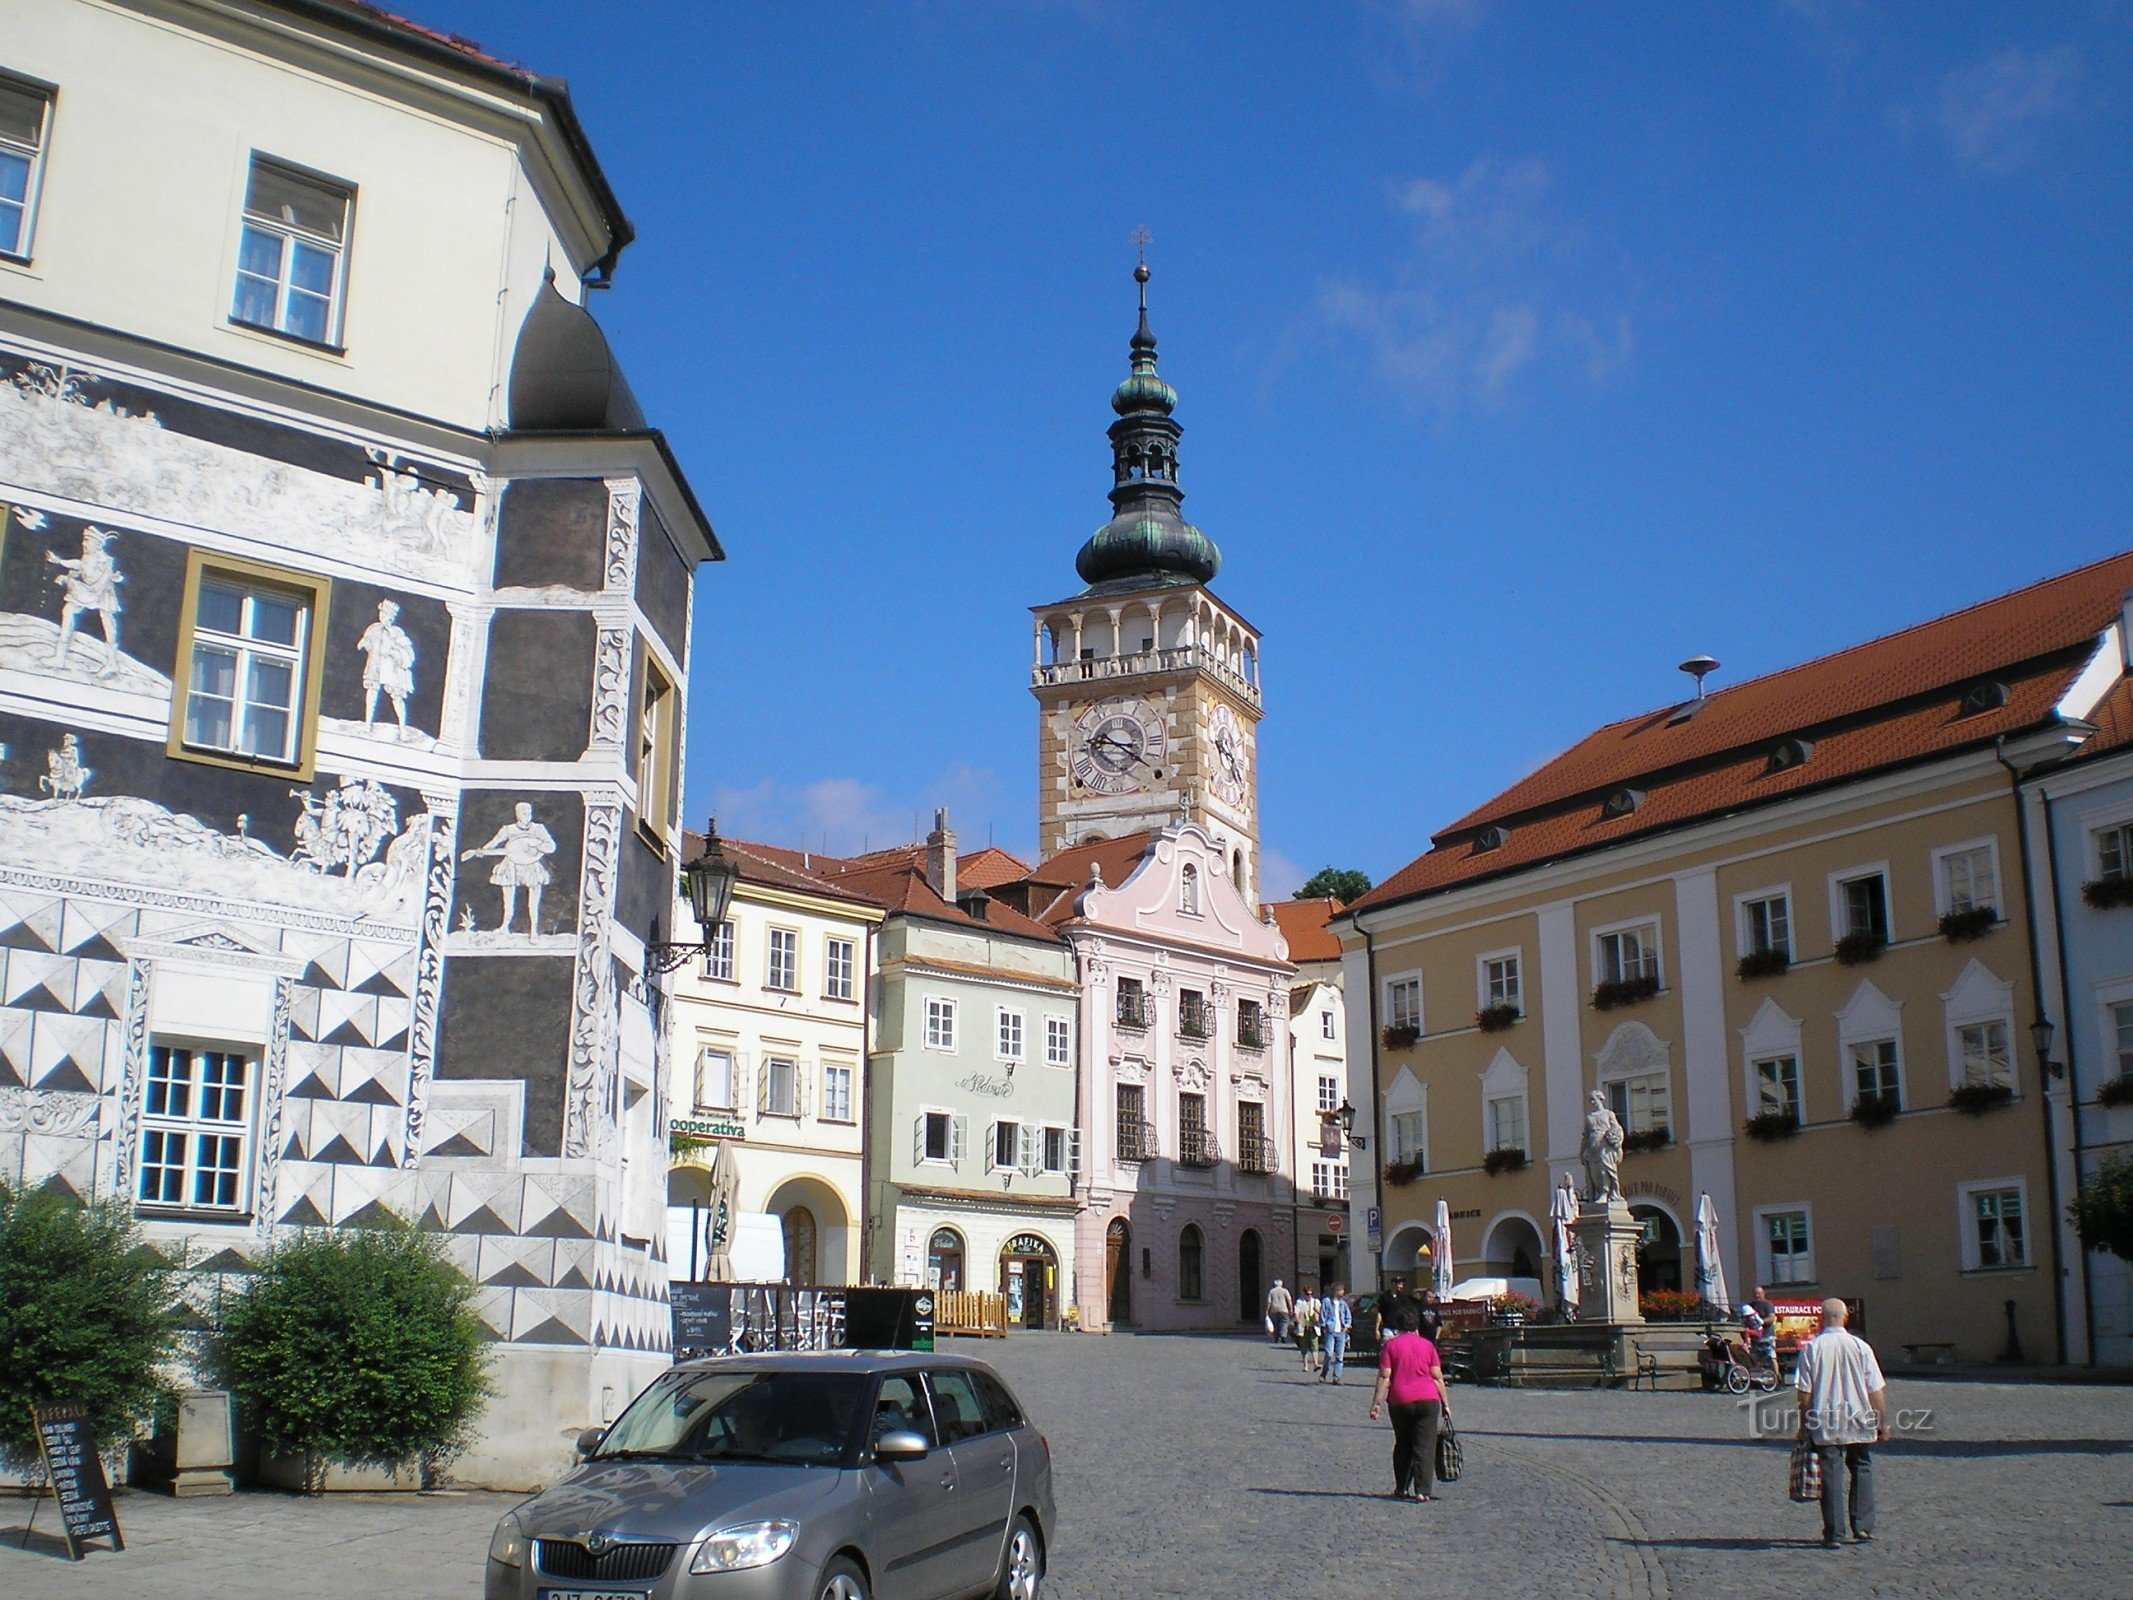 The square and the church of St. Wenceslas